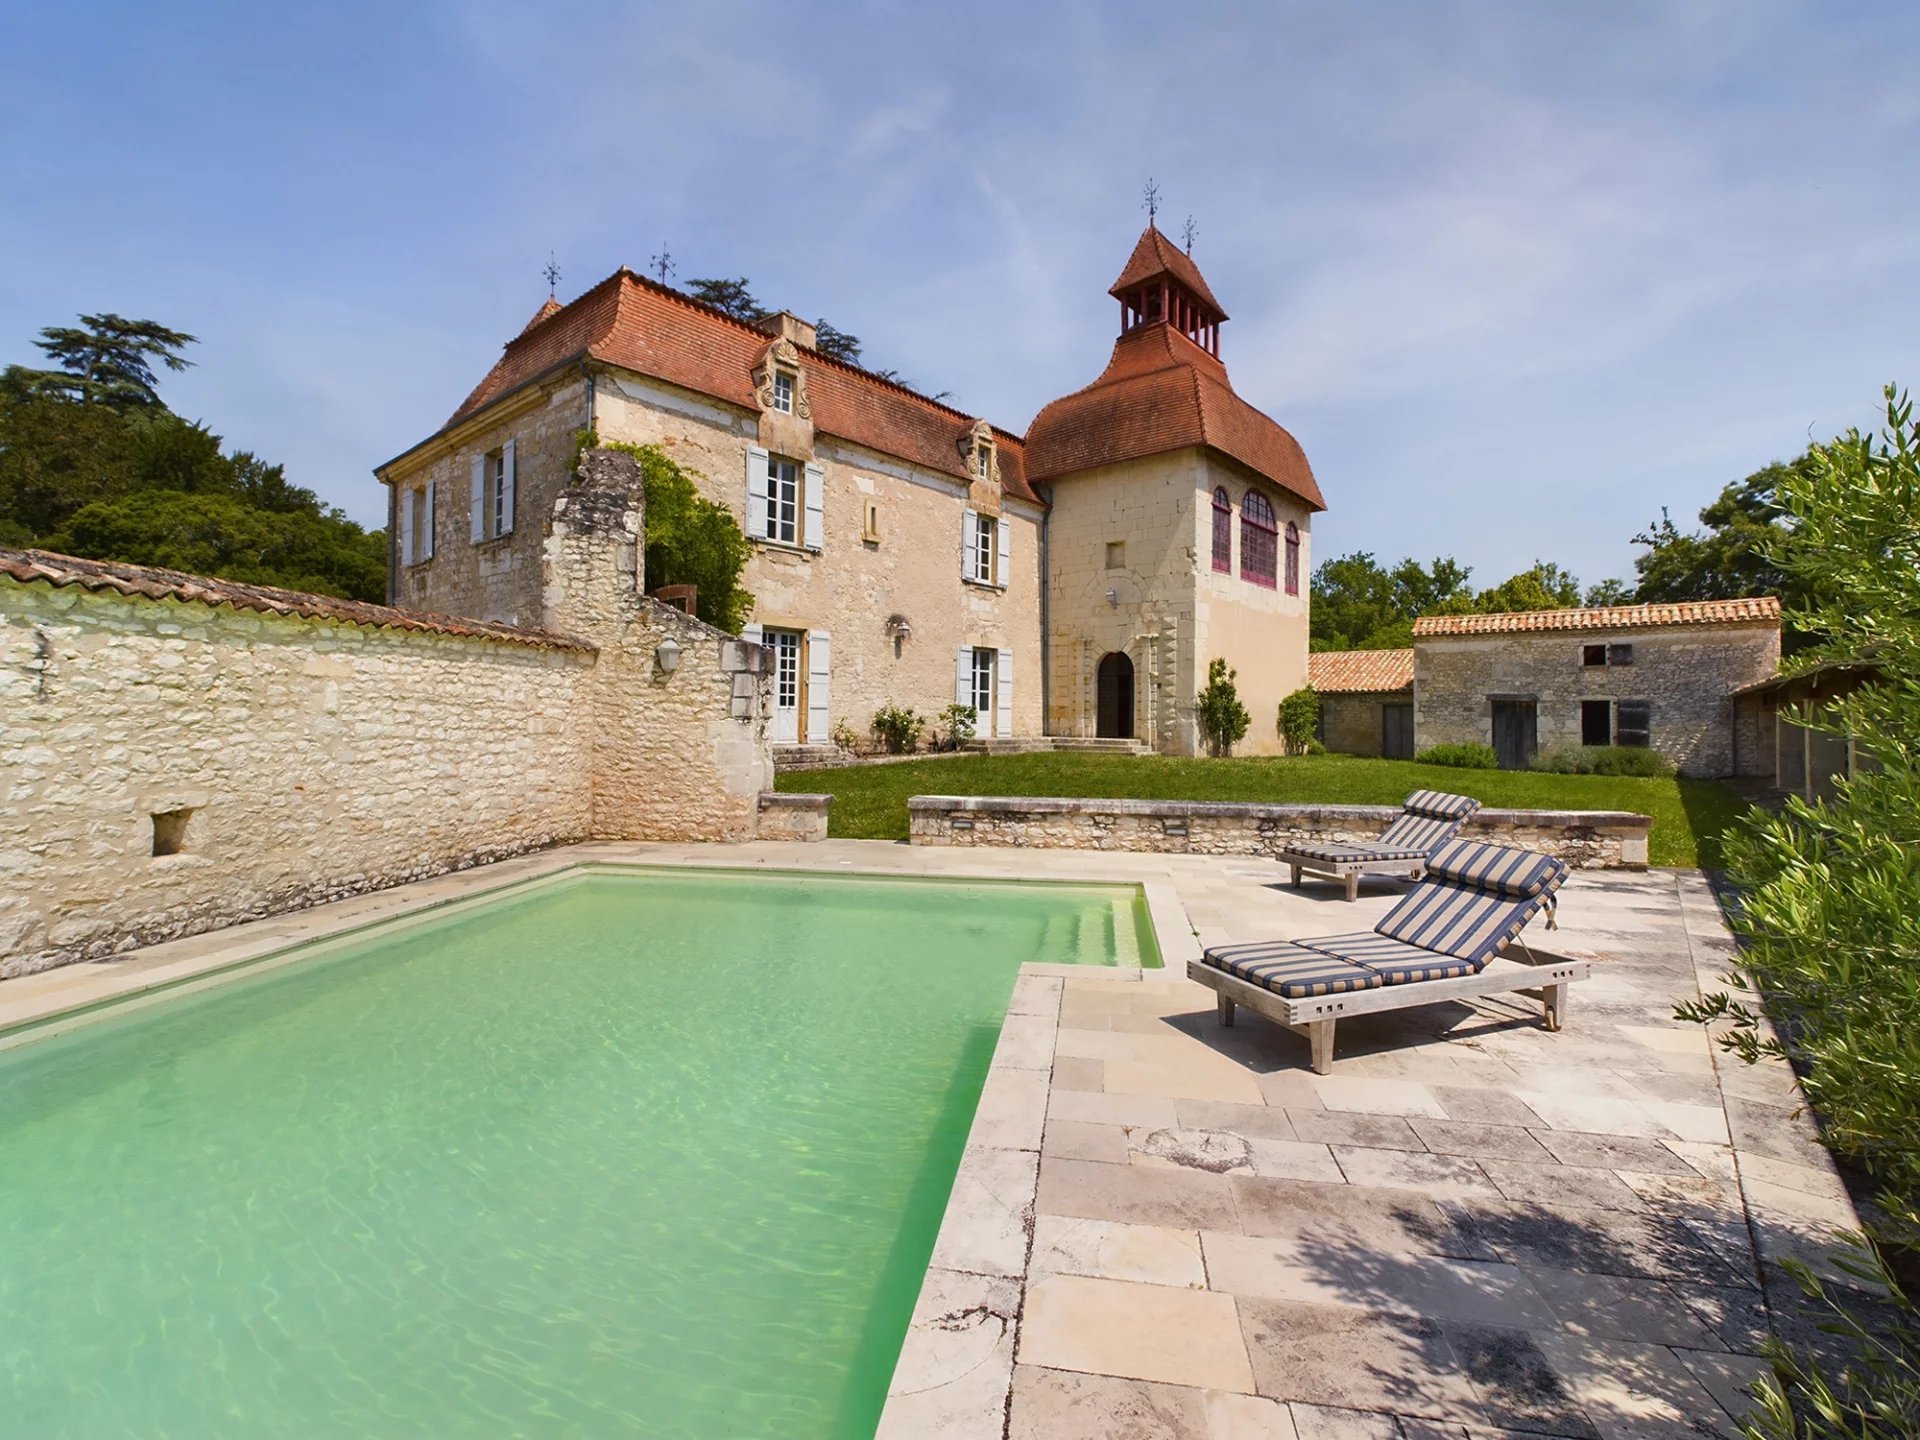 Francis York  16th Century French Chateau and 49 Acre Estate in Southwest France 11.jpeg